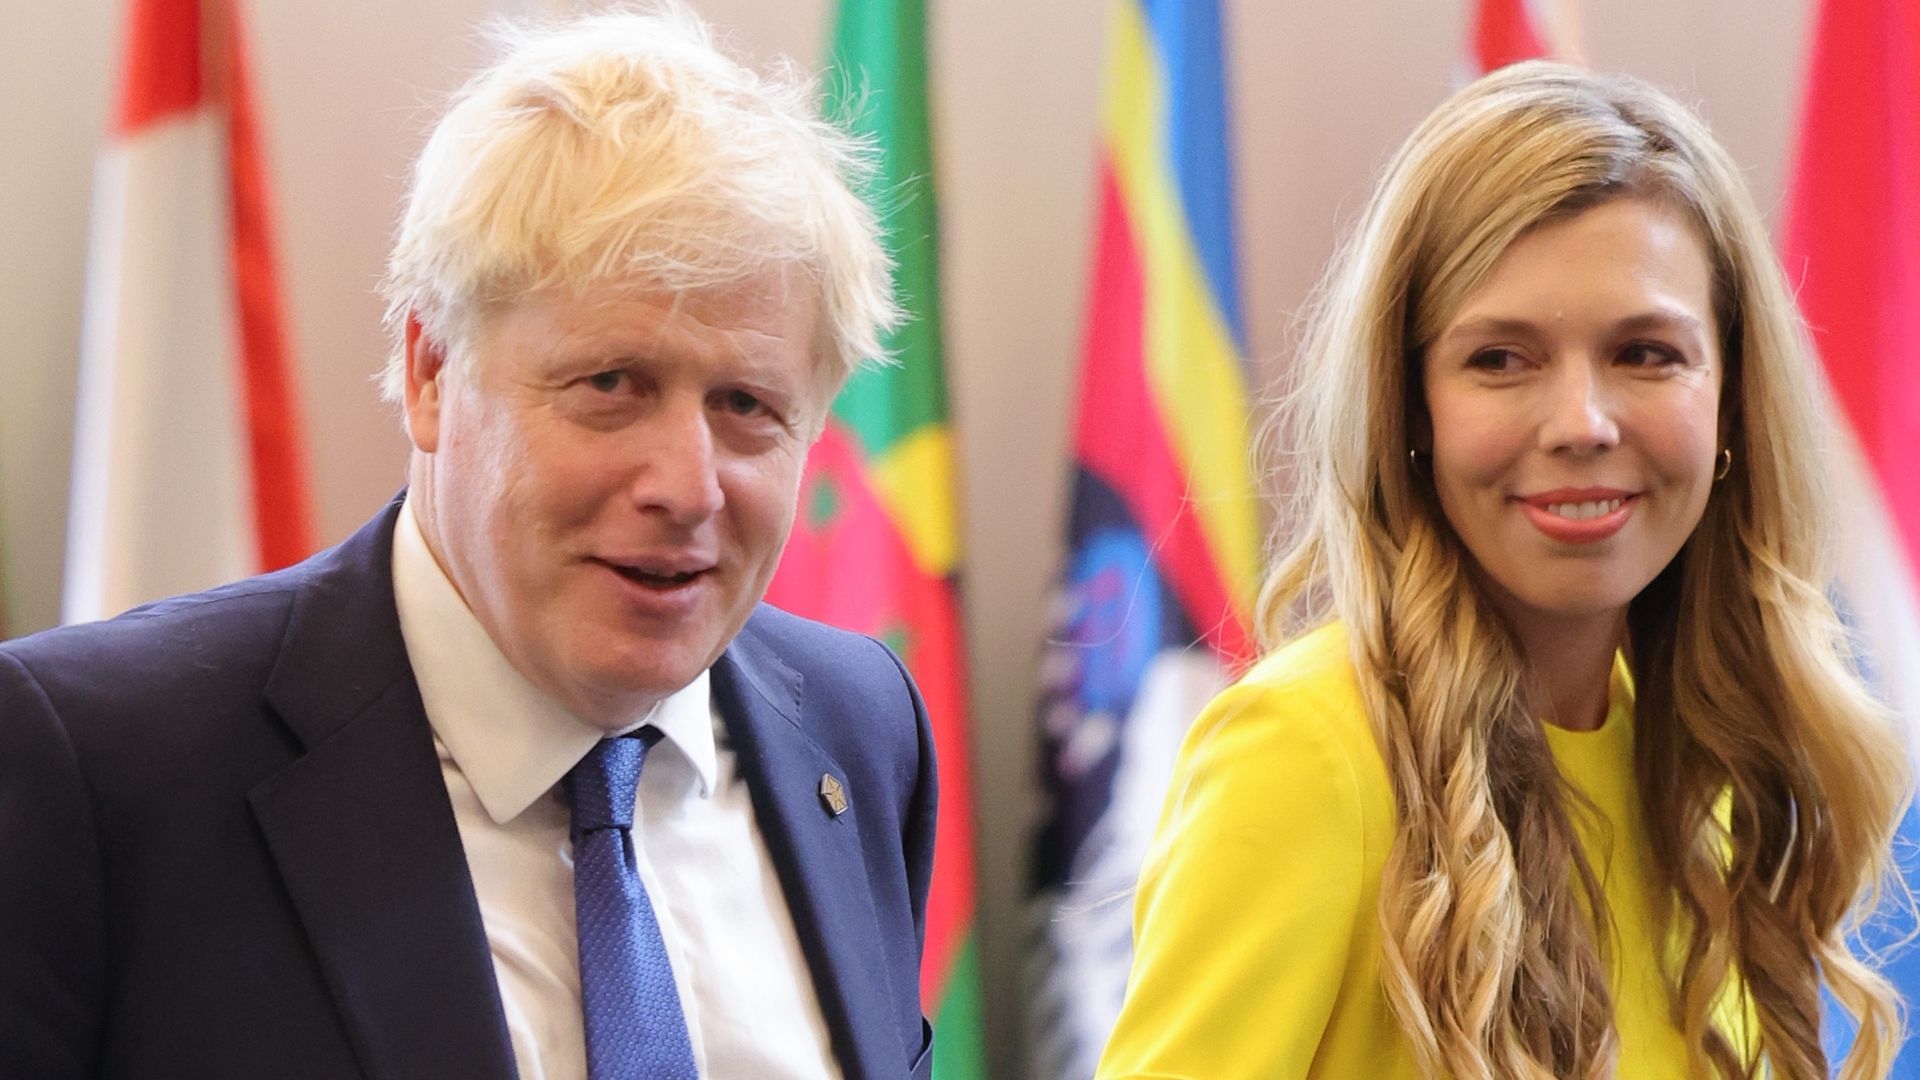 Boris Johnson in a suit walking with Carrie Johnson in a yellow dress